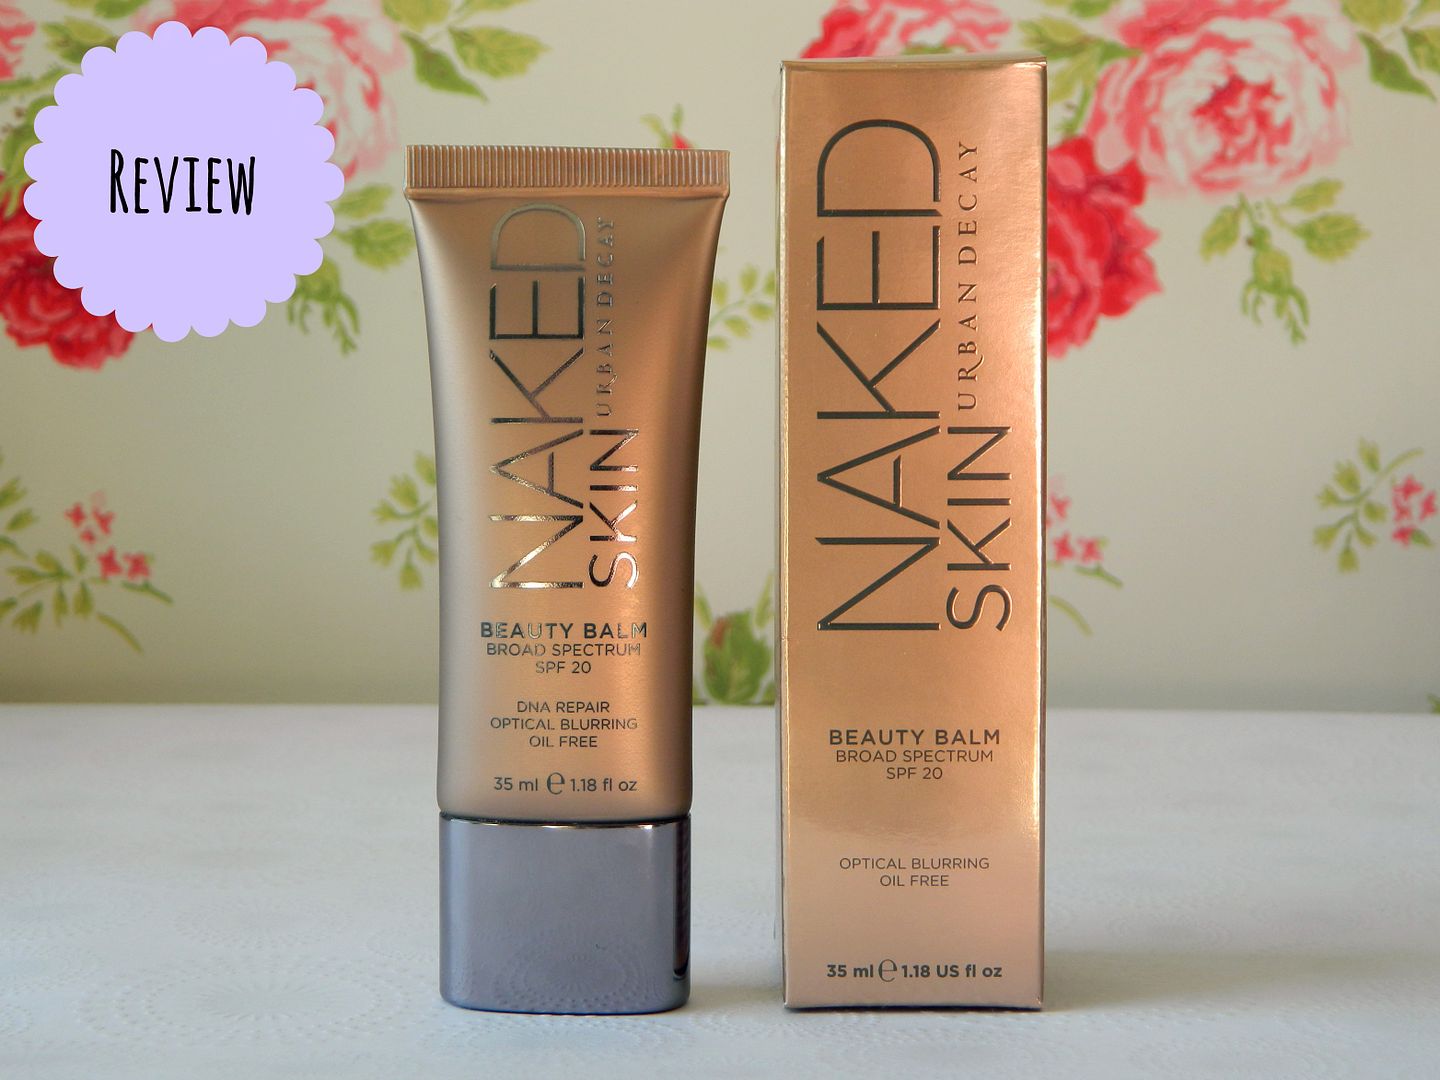 Urban Decay Naked Skin Beauty Balm Review Belle-amie